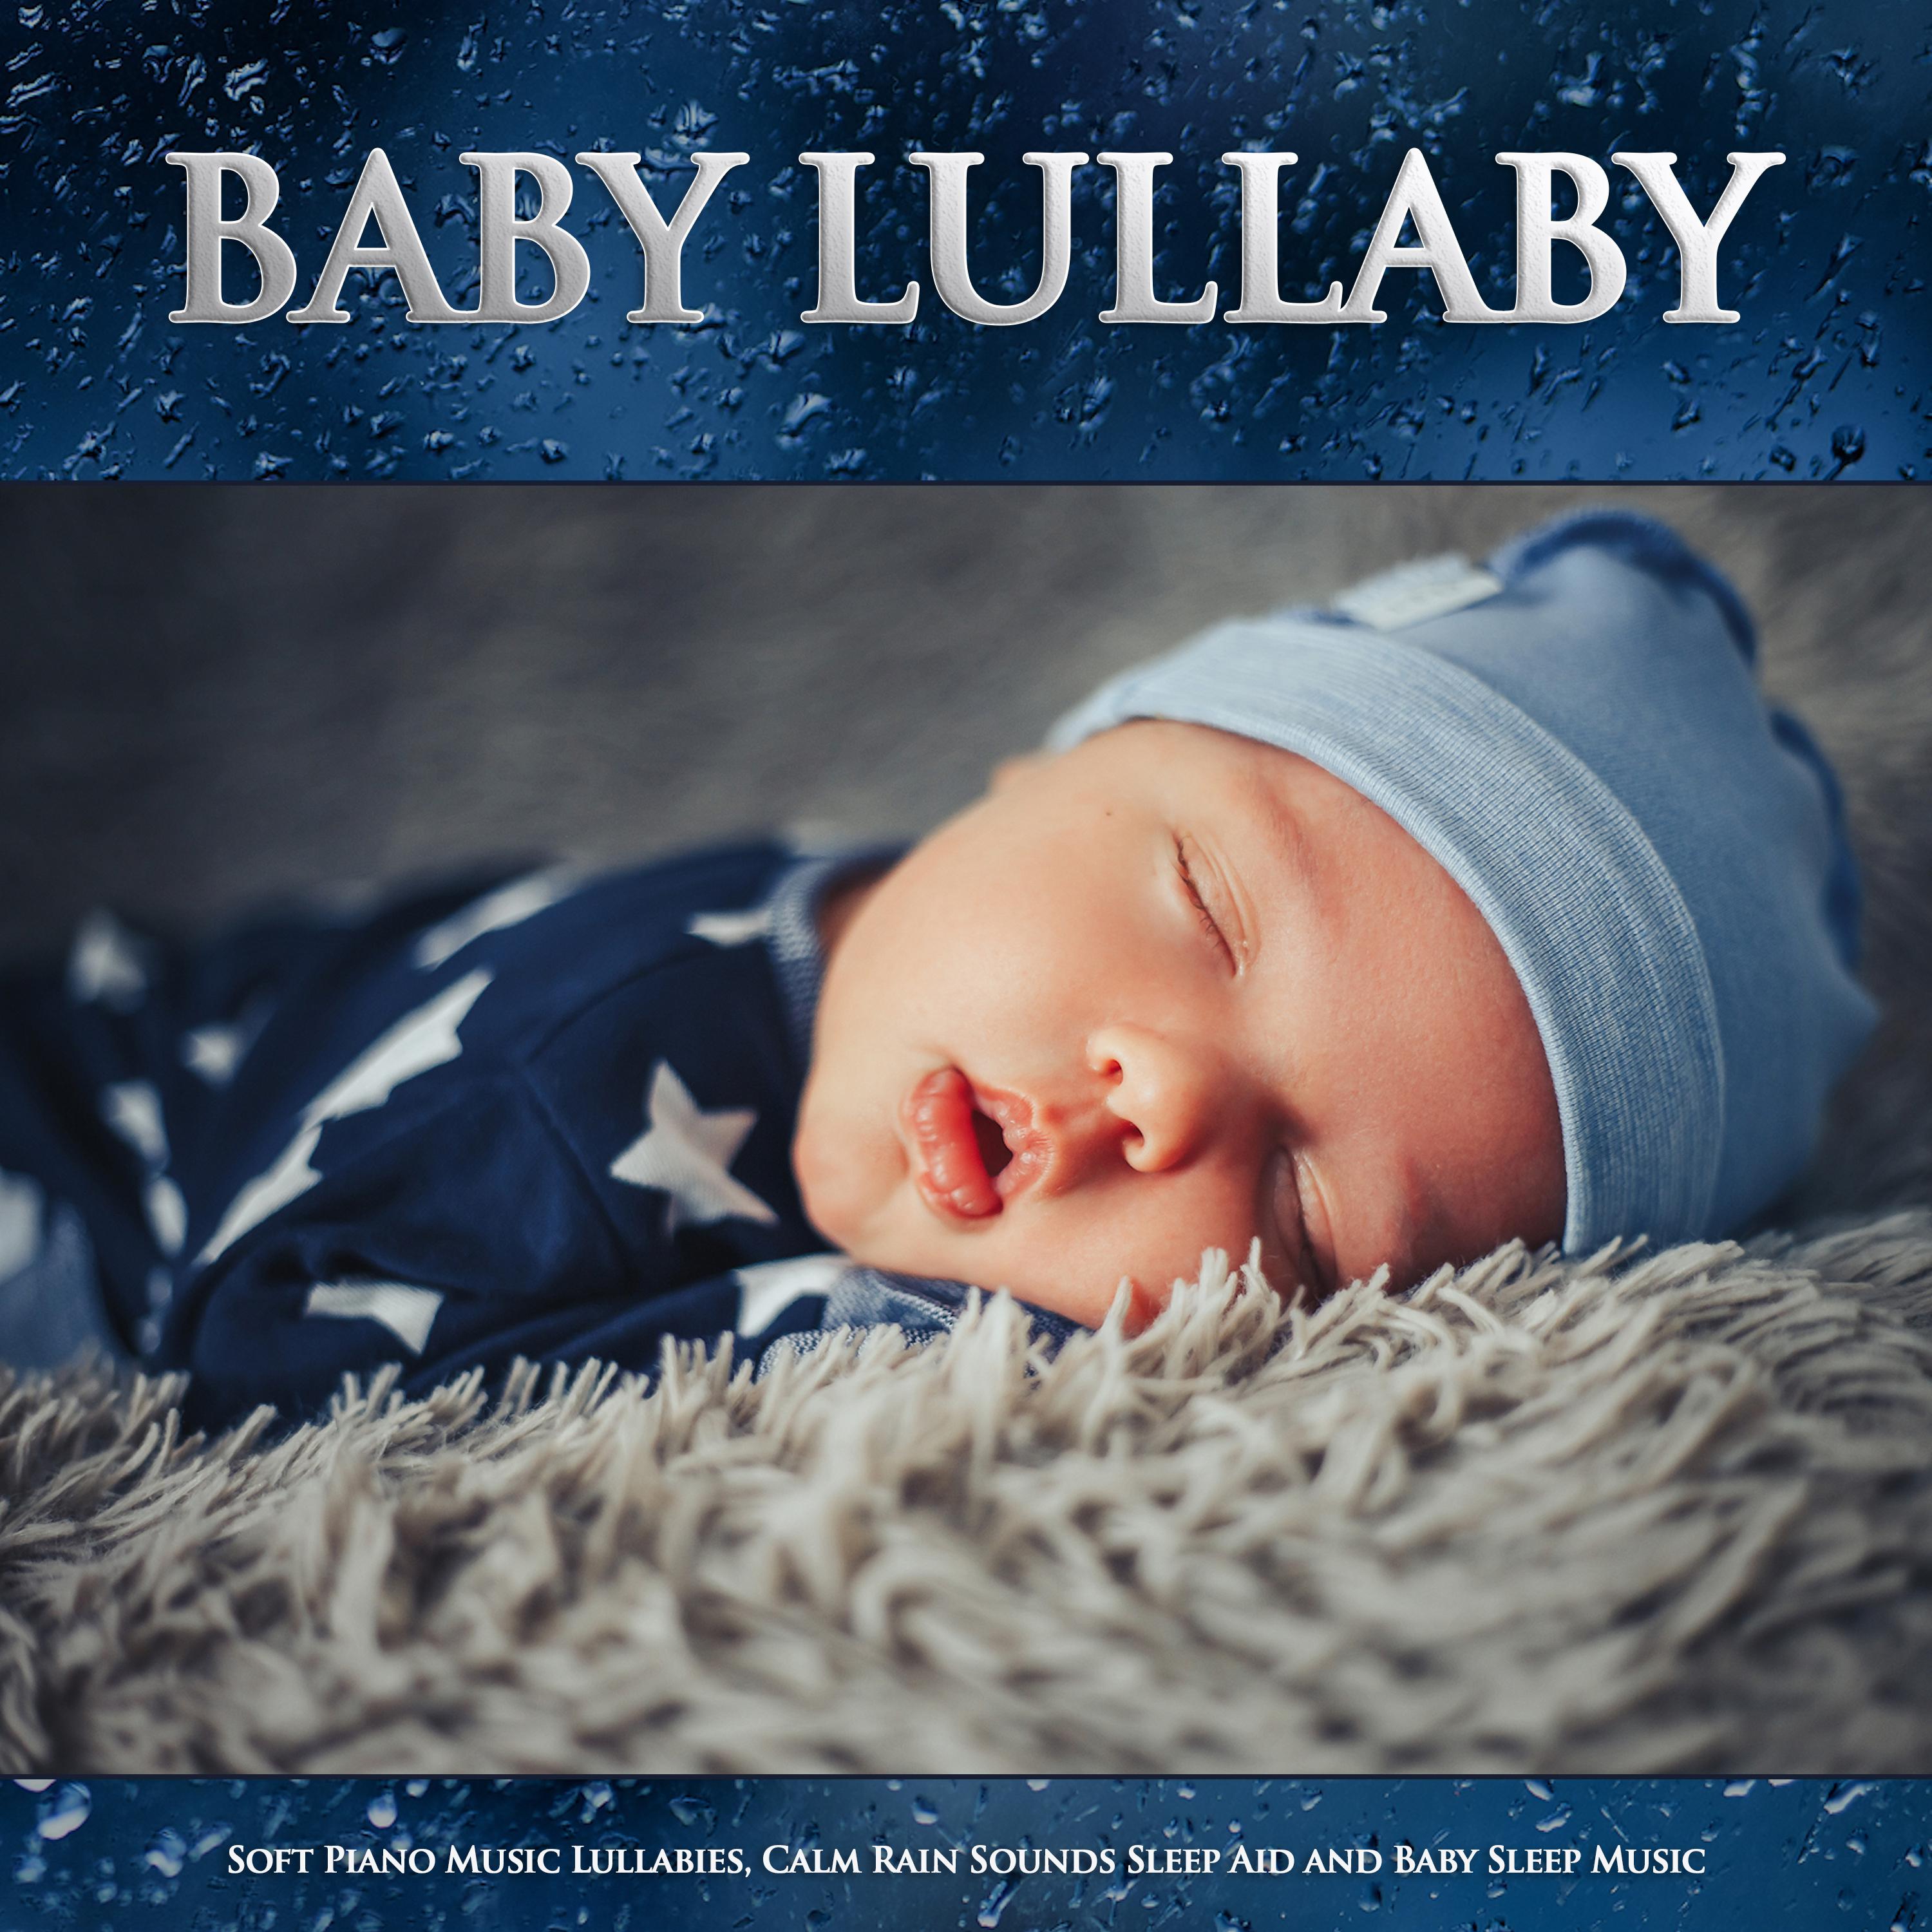 Baby Lullaby - Soothing Rain Music